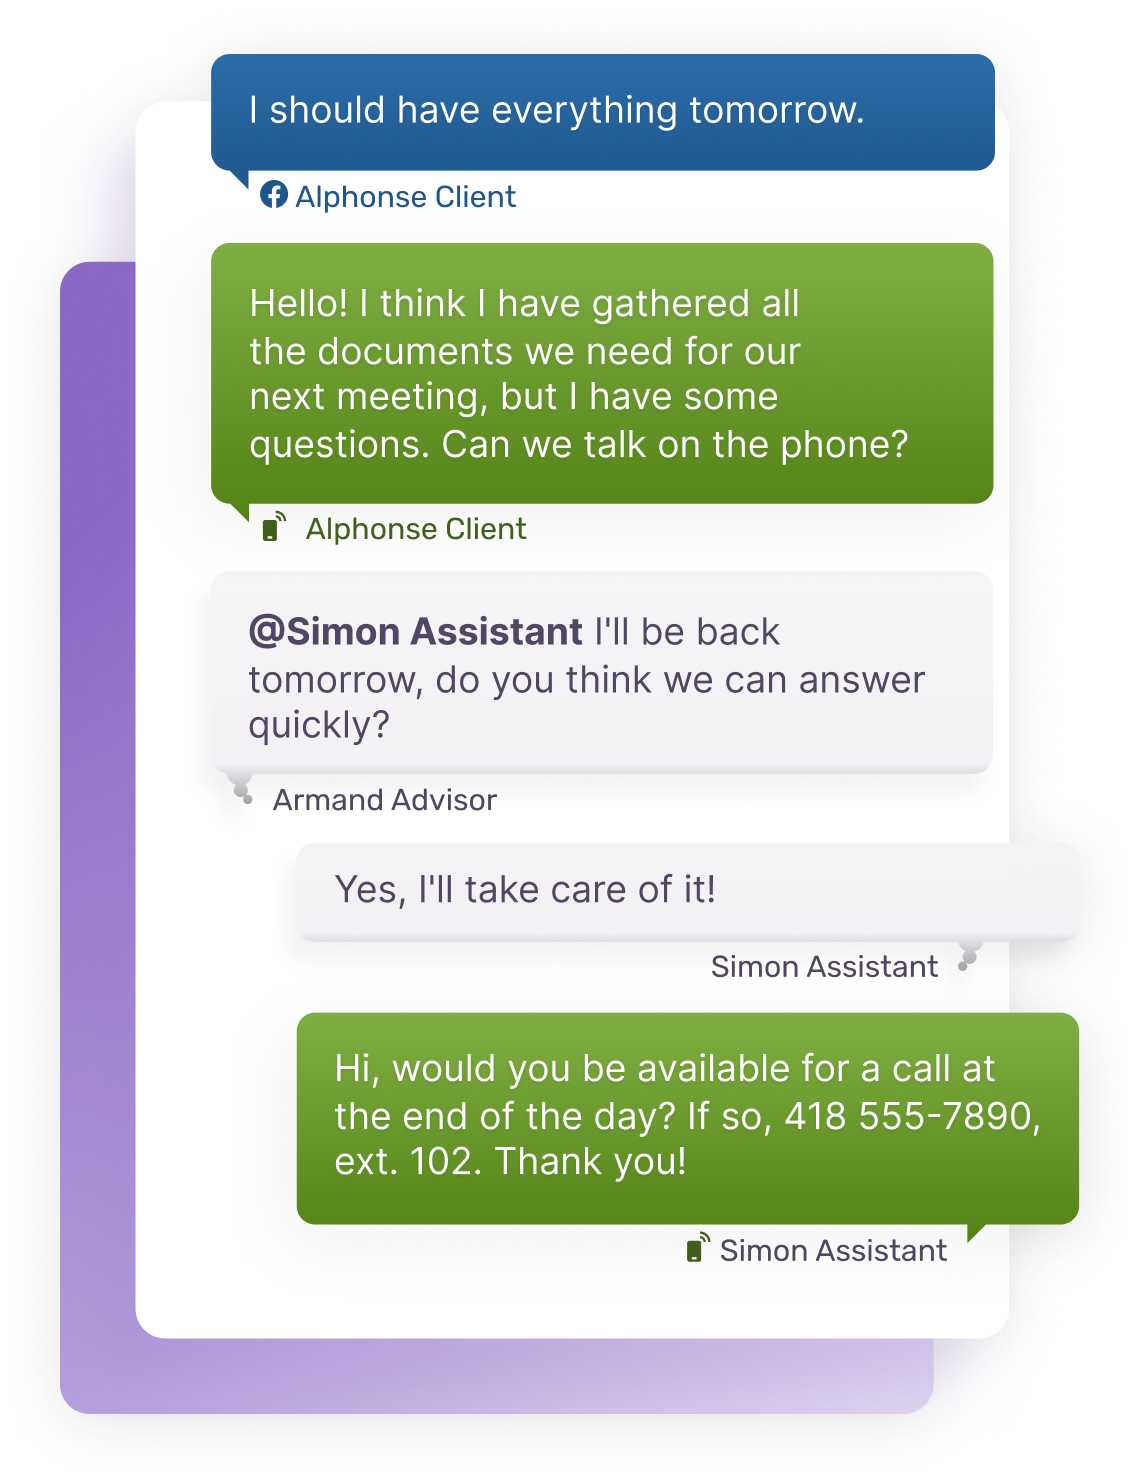 Example of a unified chat feed, with SMS messages, a Facebook message, and internal messages between advisors